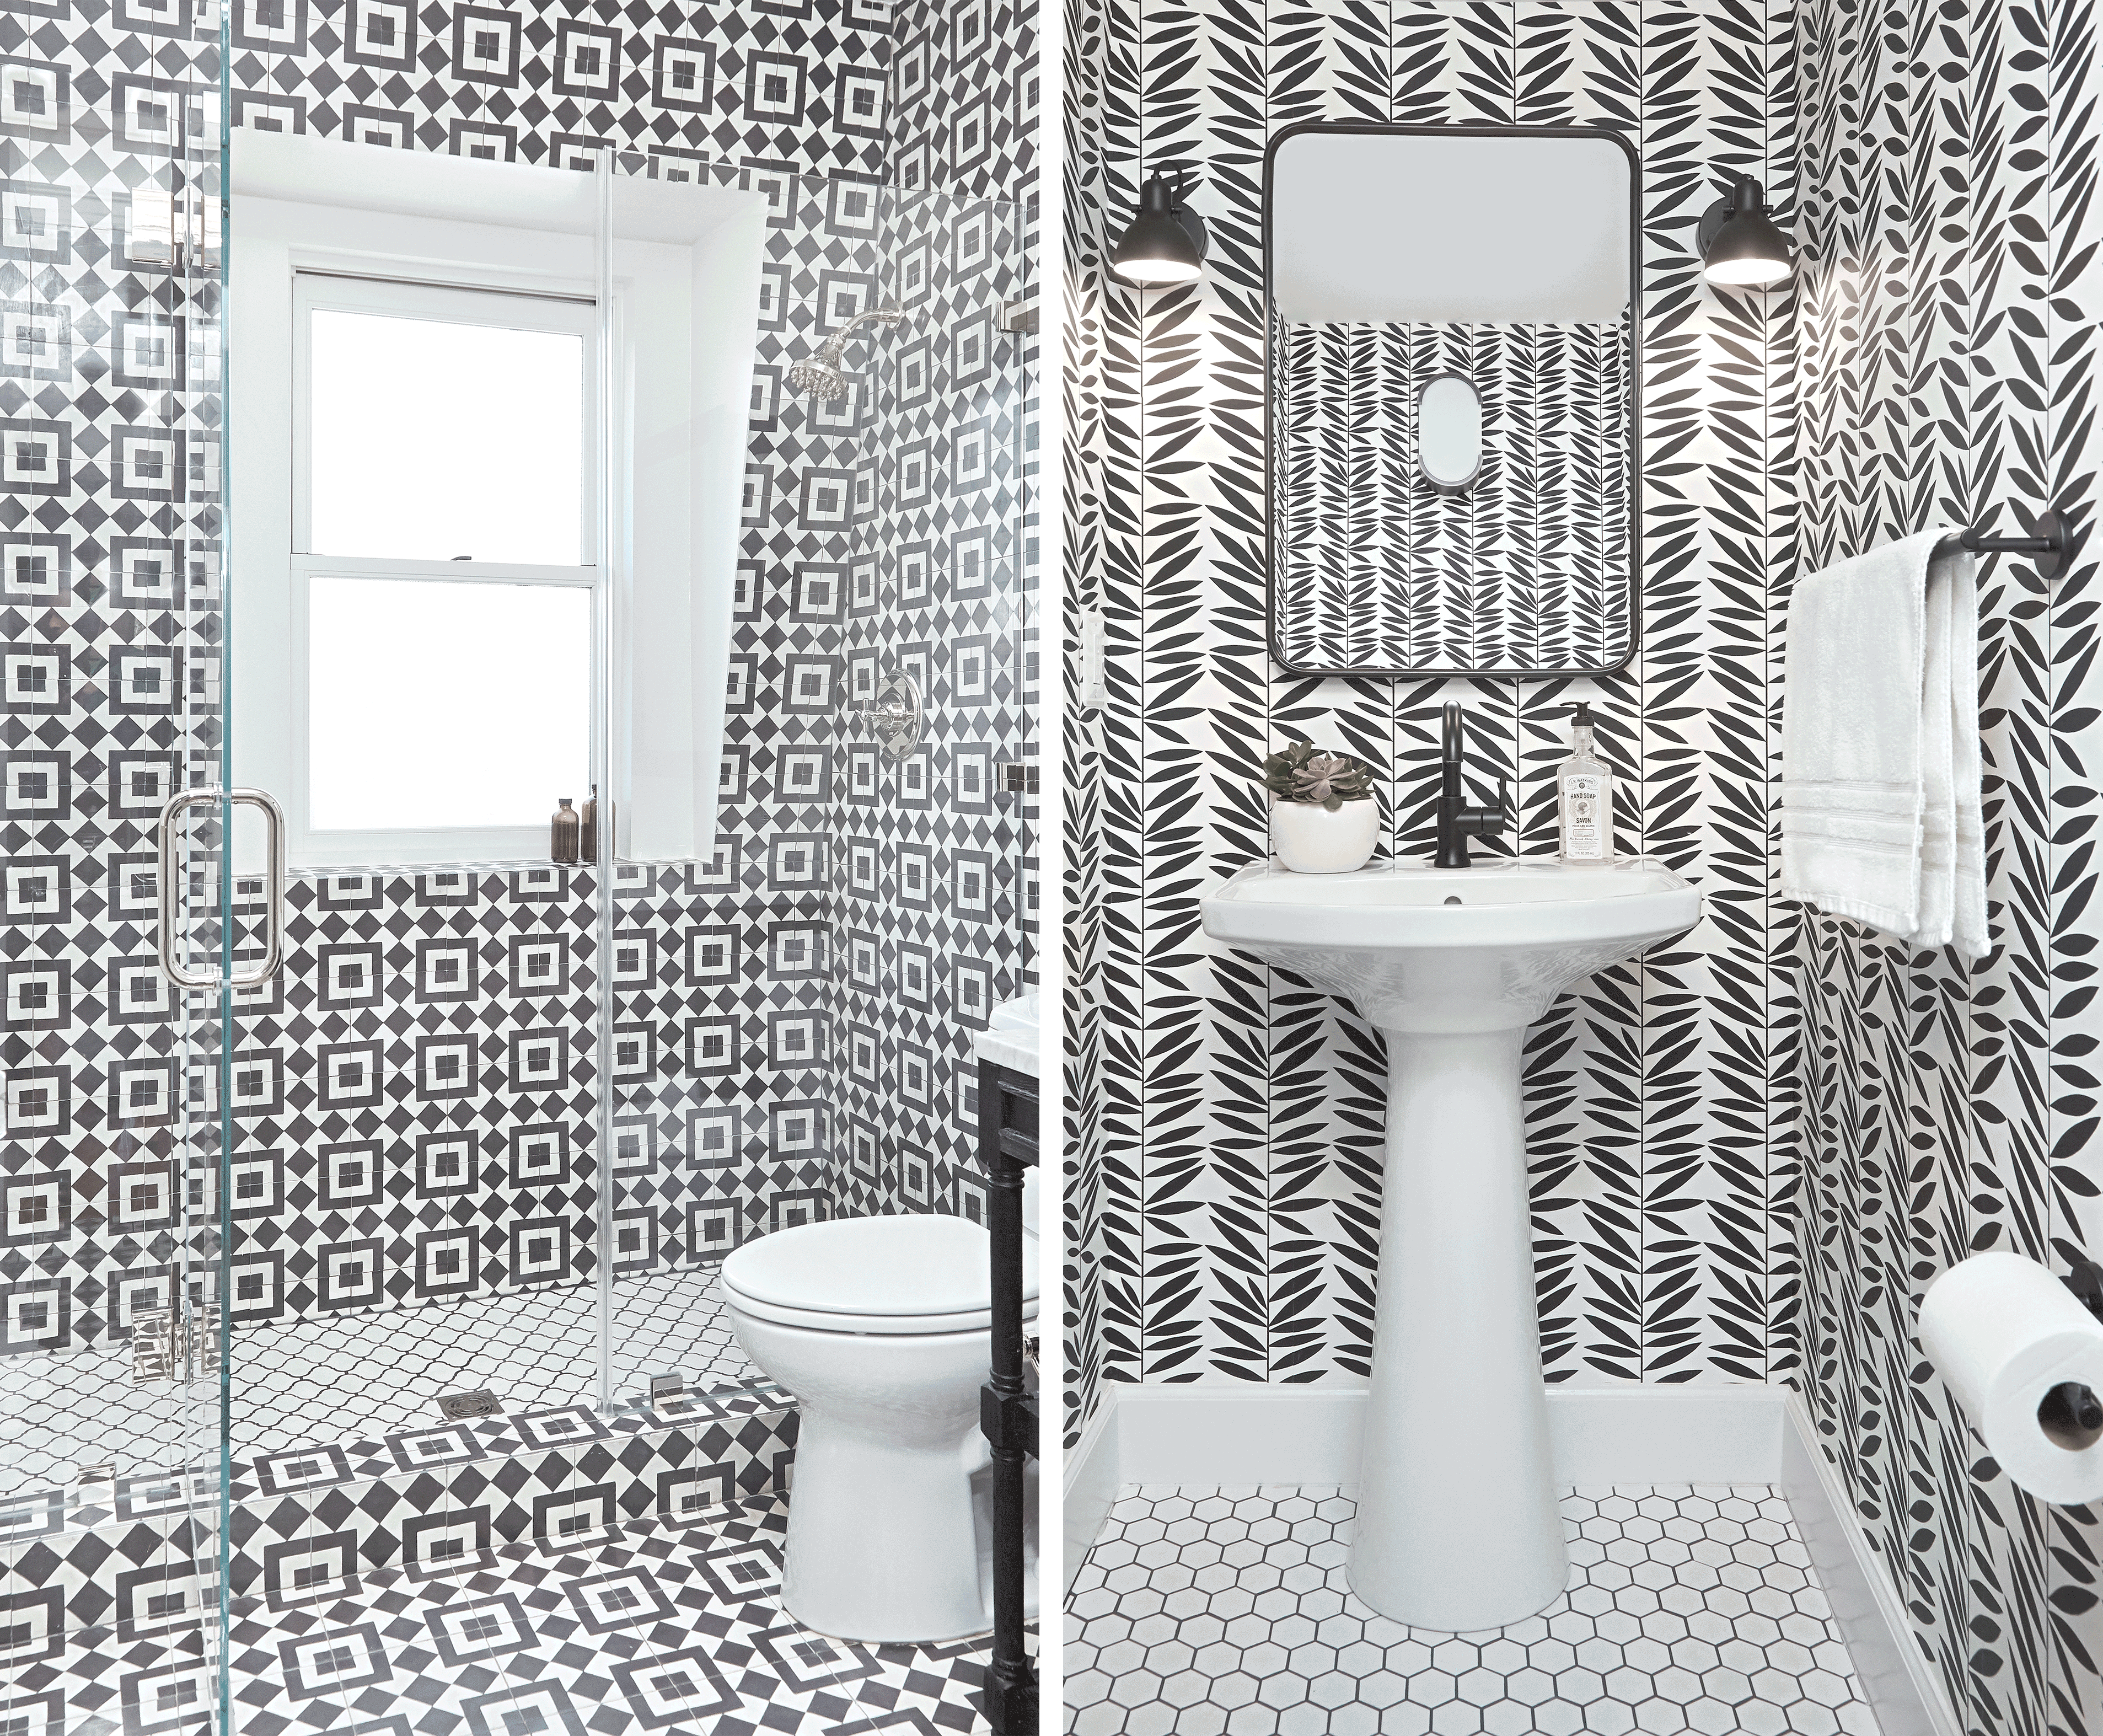 This designer says black toilets are dramatic and chic. Would you dare? -  The Washington Post